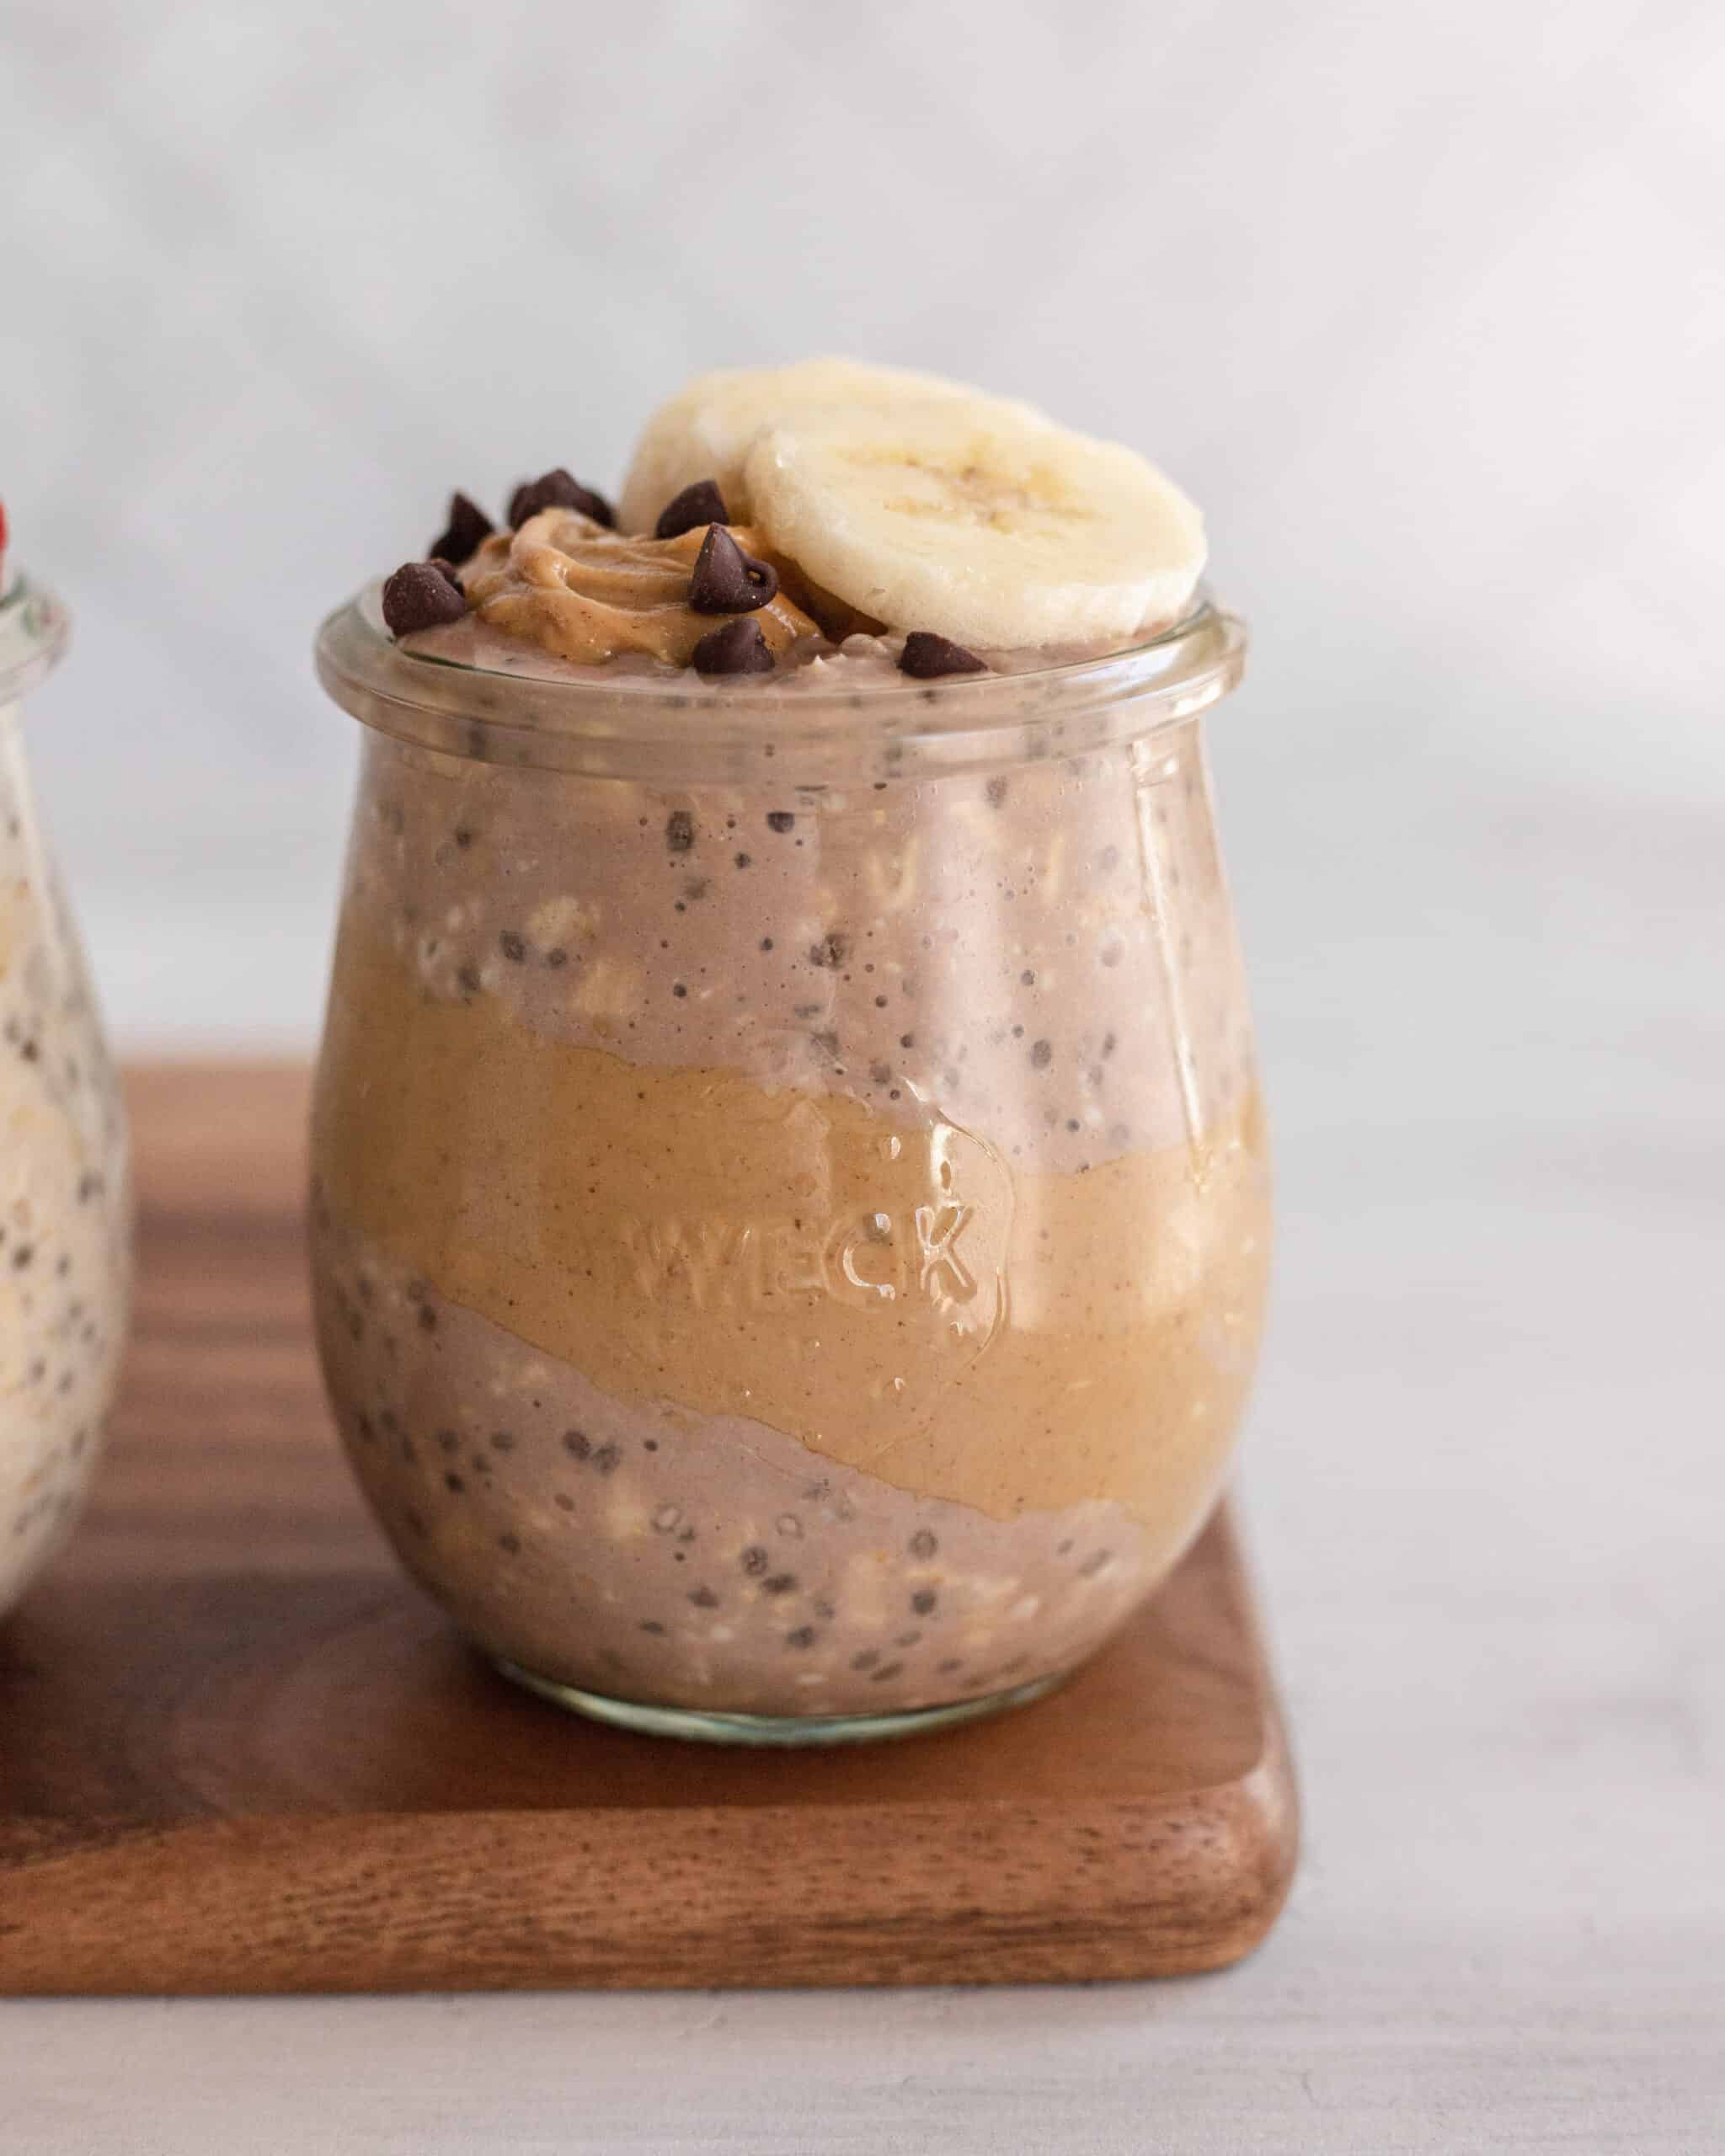 clear glass jar with chocolate overnight oats and a strip of peanut butter on the jar, topped with banana and mini chocolate chips